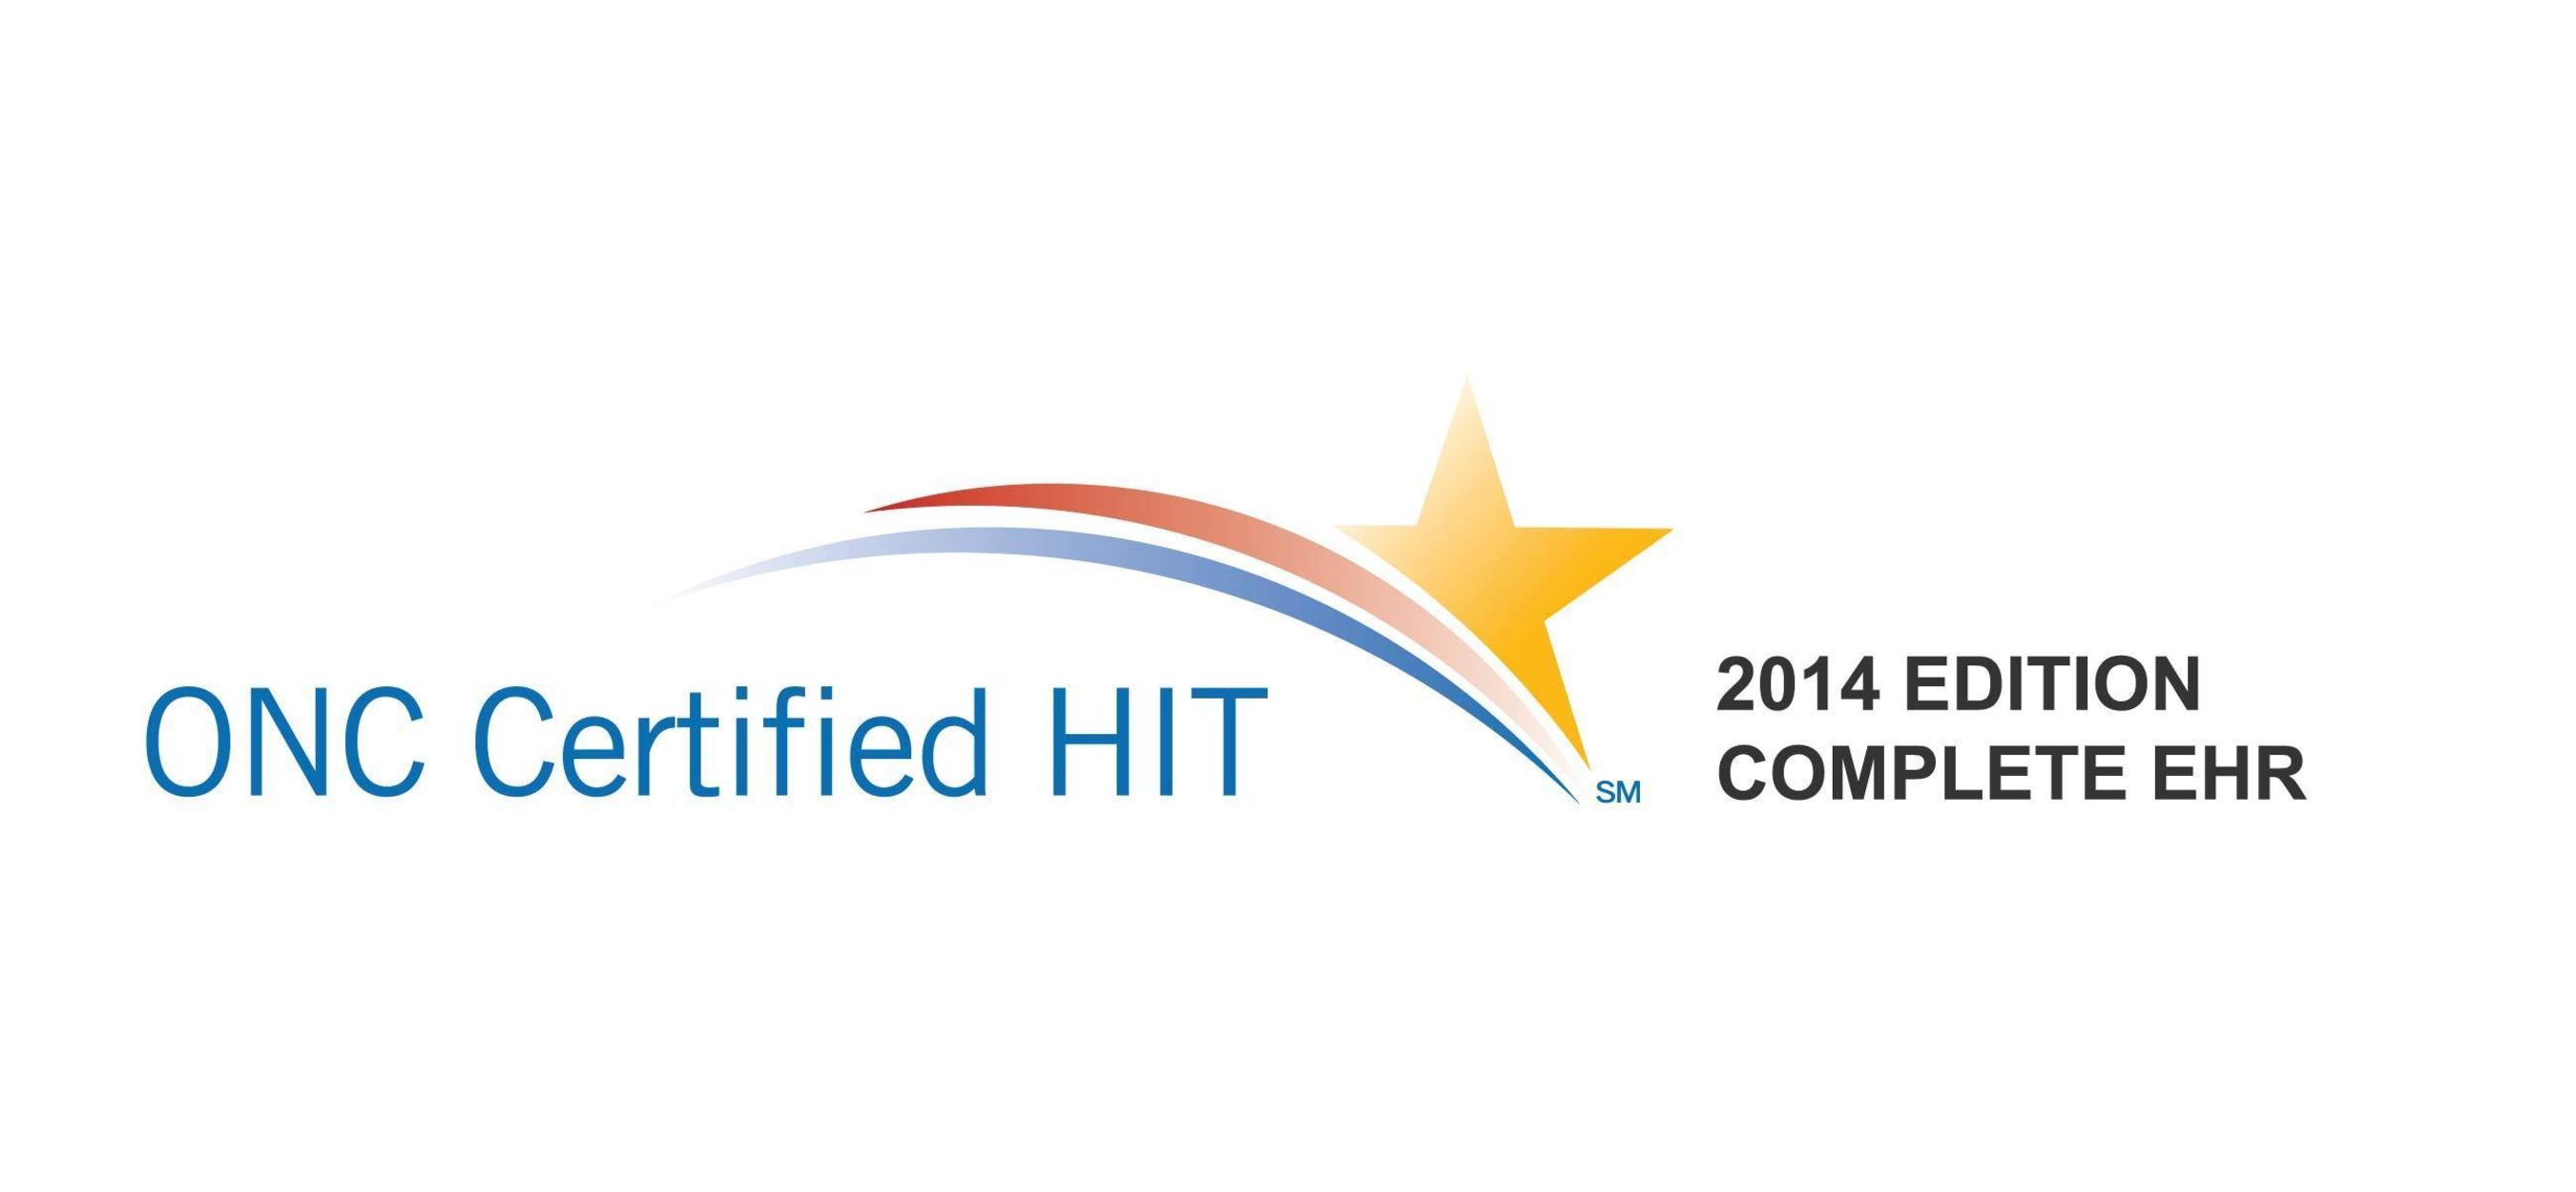 MaximEyes EHR Software Receives 2014 ONC HIT Complete EHR Certification. (PRNewsFoto/First Insight Corporation)